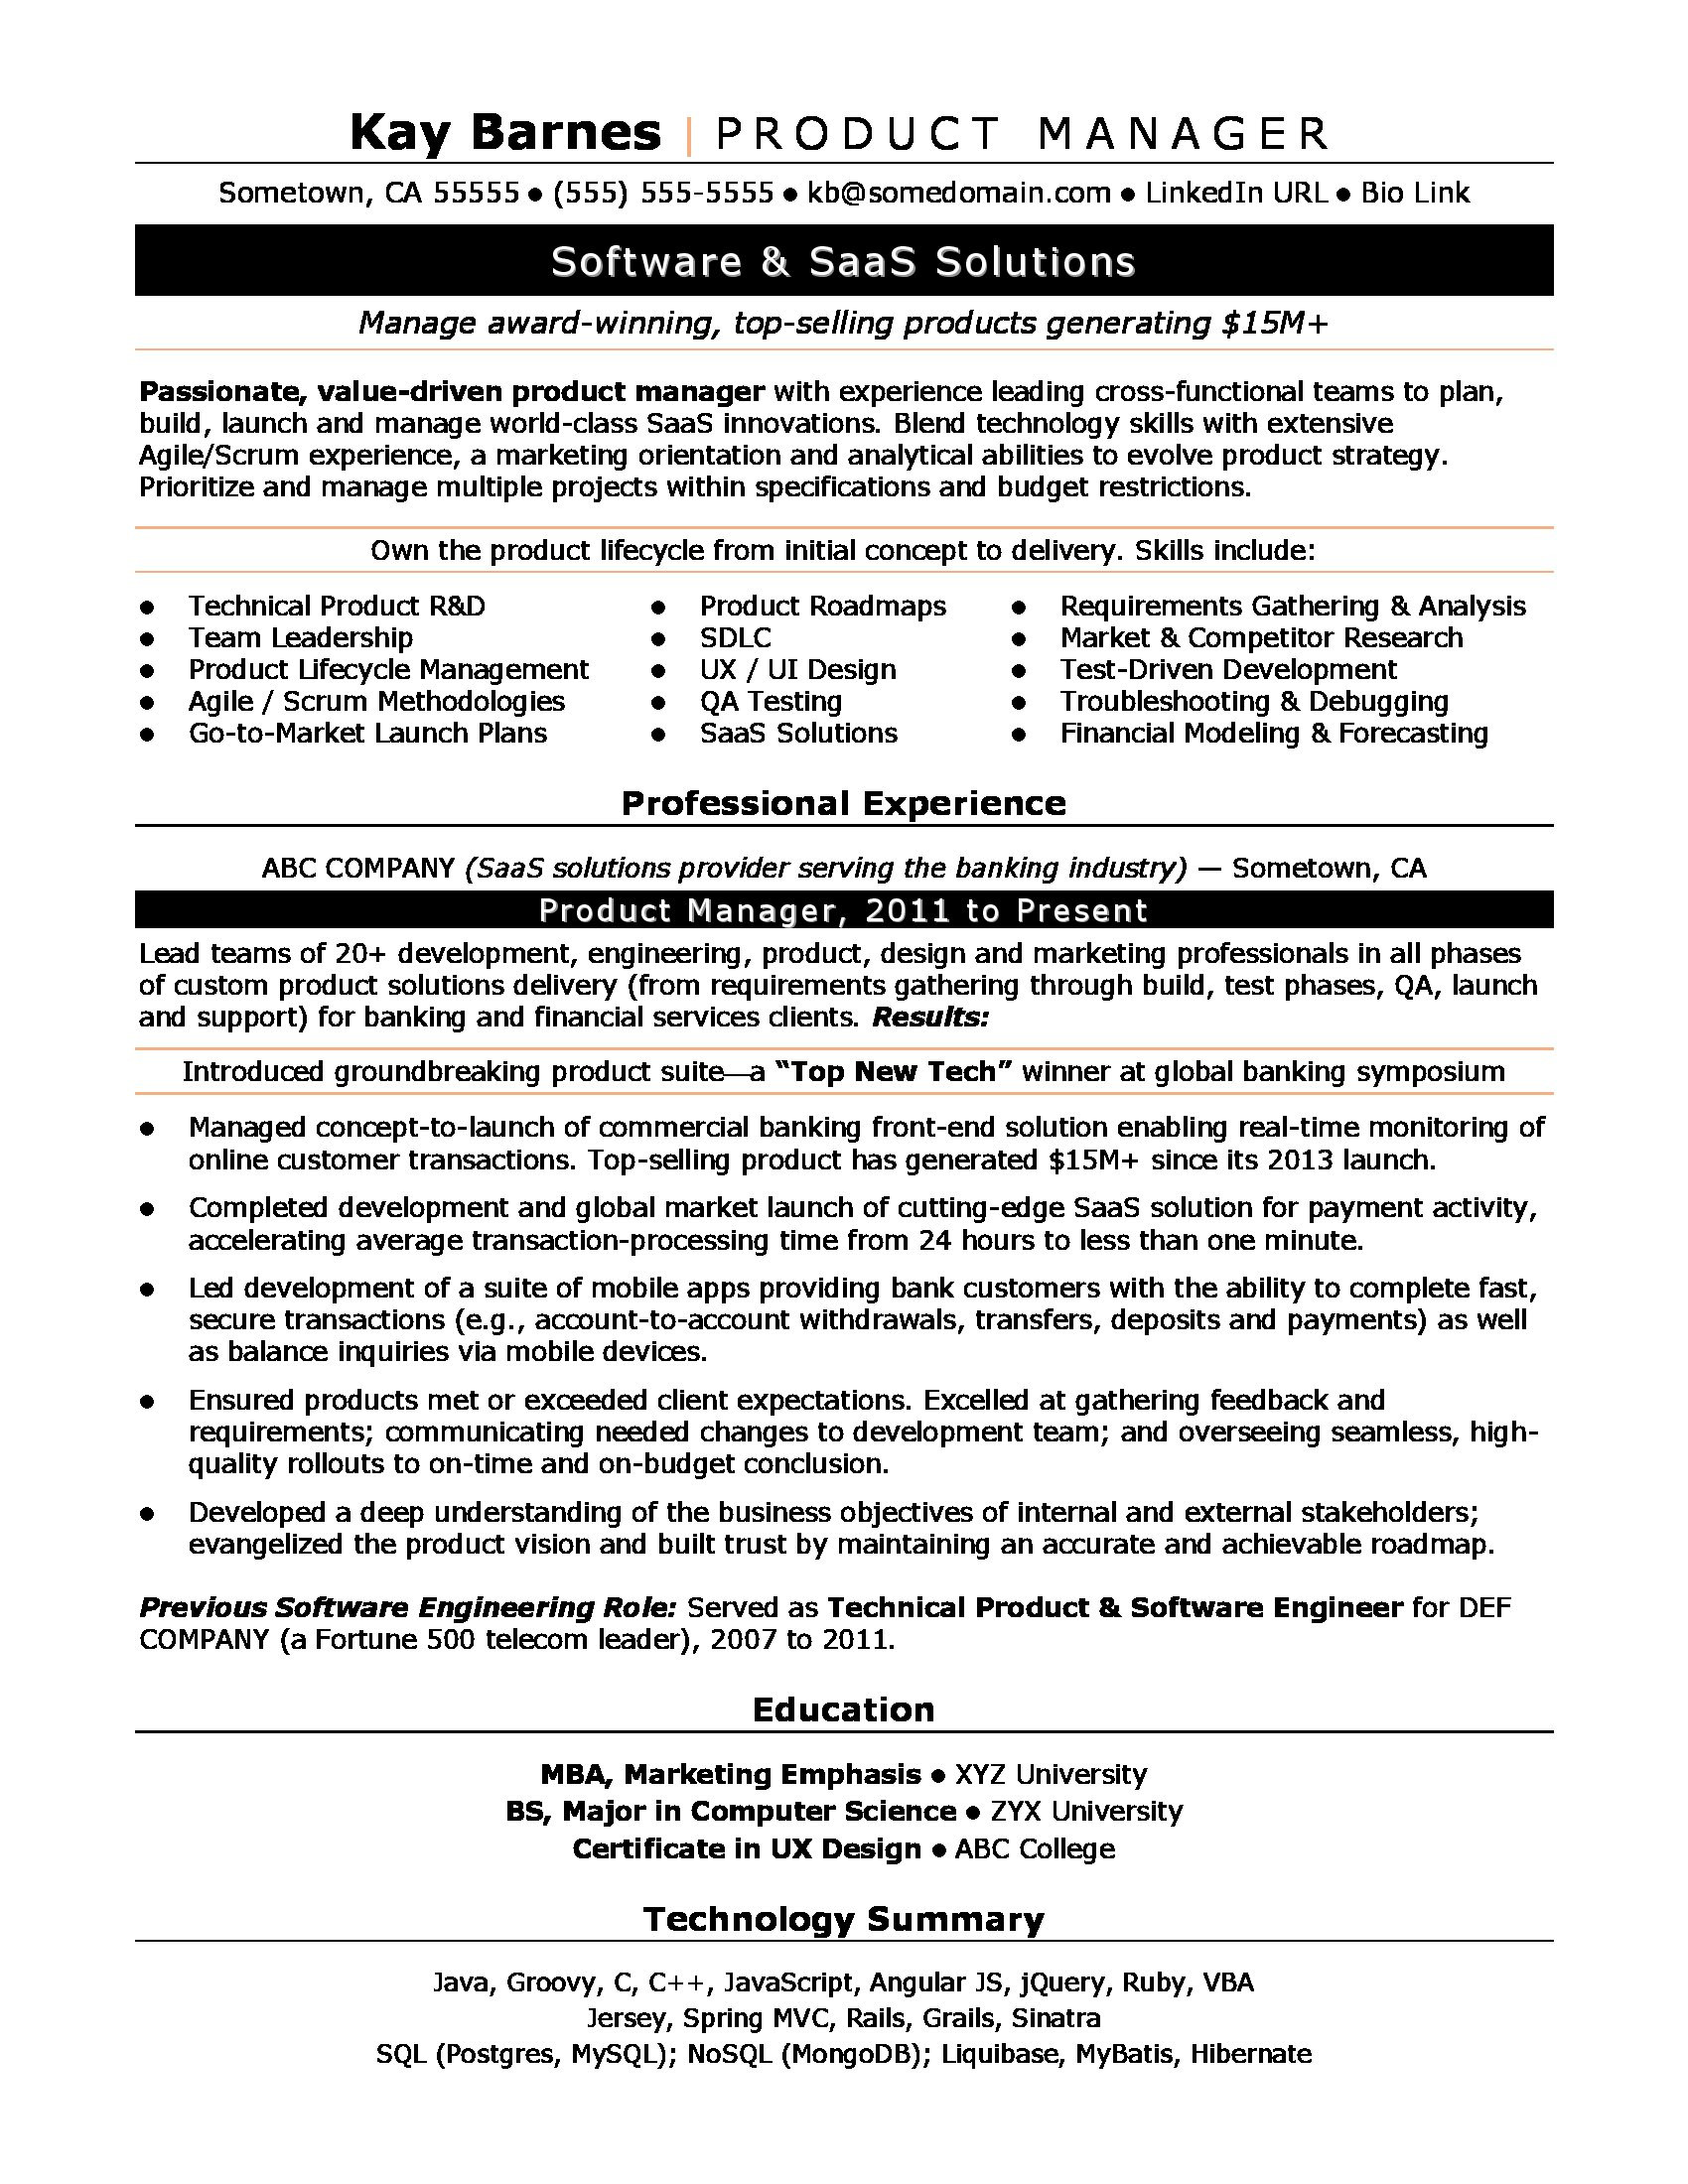 Professional Resume for Product Manager Sample Product Manager Resume Sample Monster.com